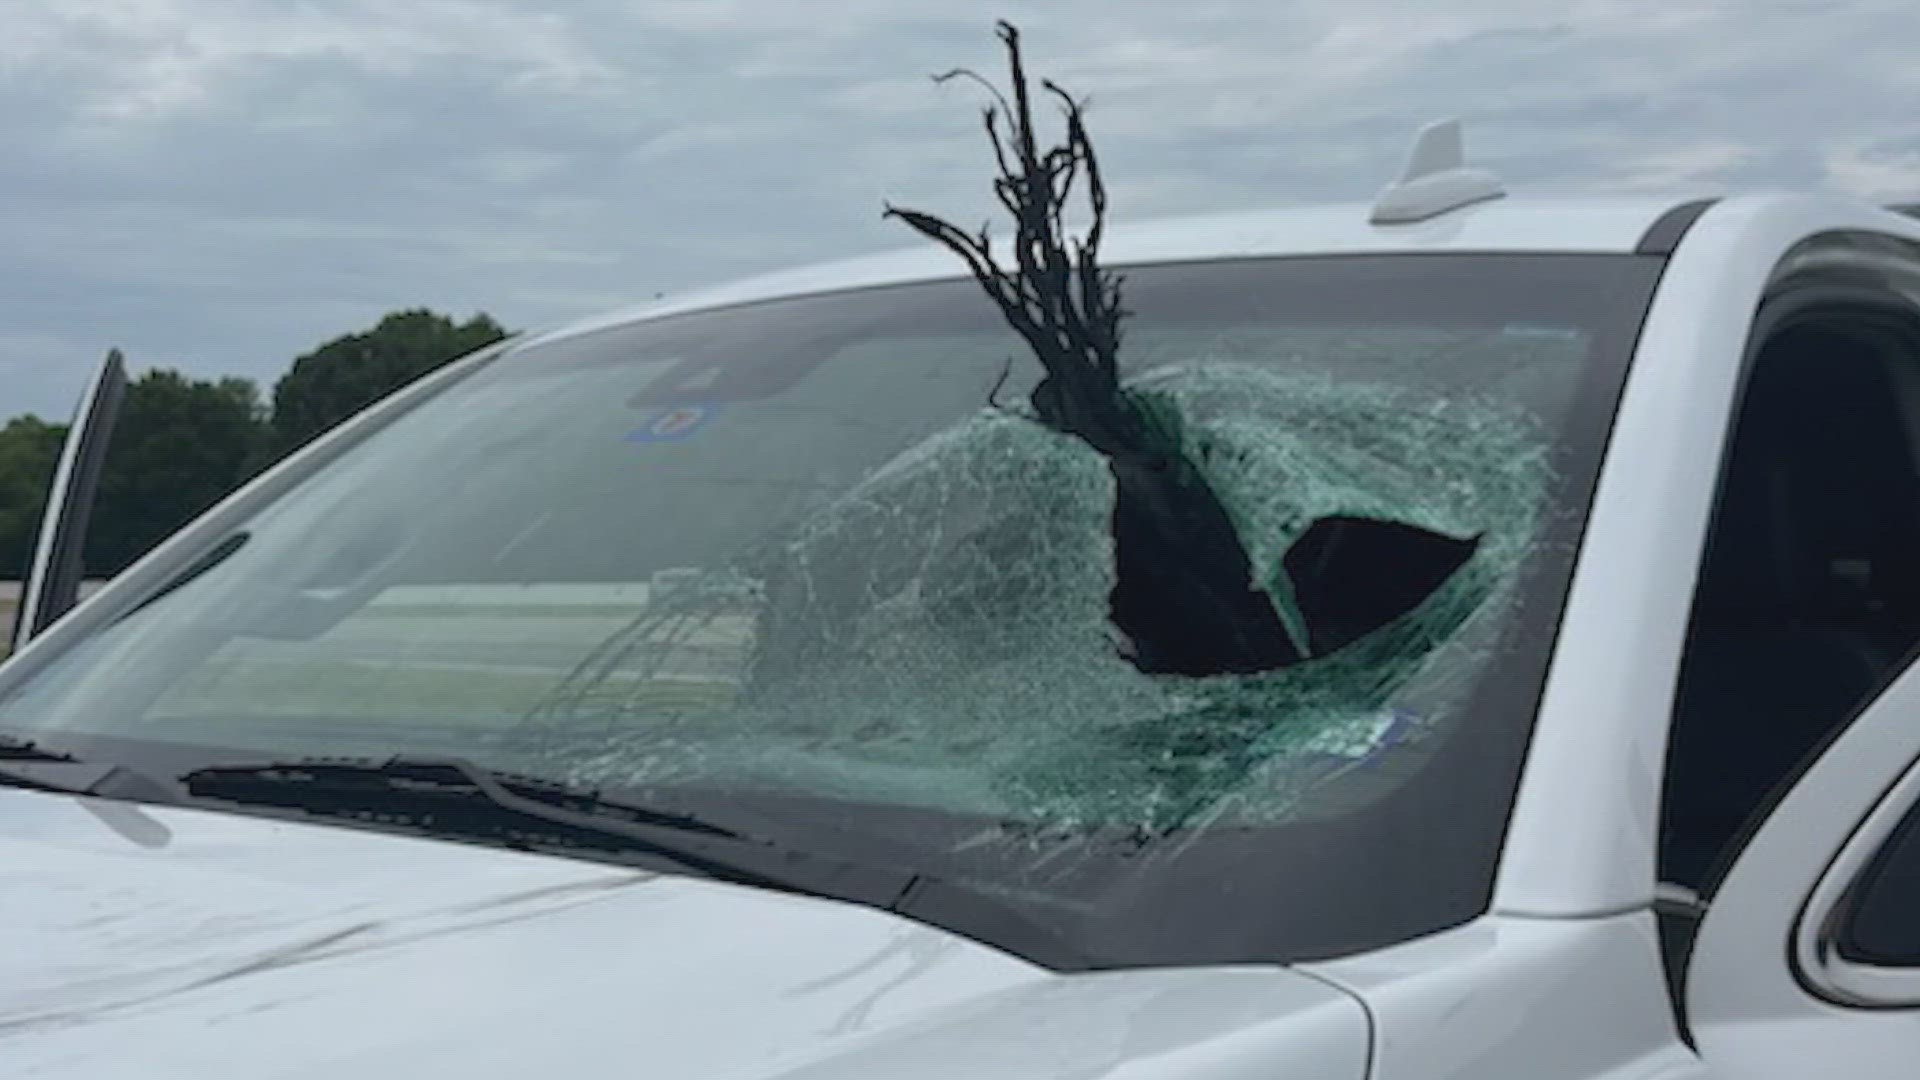 The family was driving on Interstate 20 when the 2-foot-long tire tread punched the hood, pierced the window and ricocheted off the steering wheel.